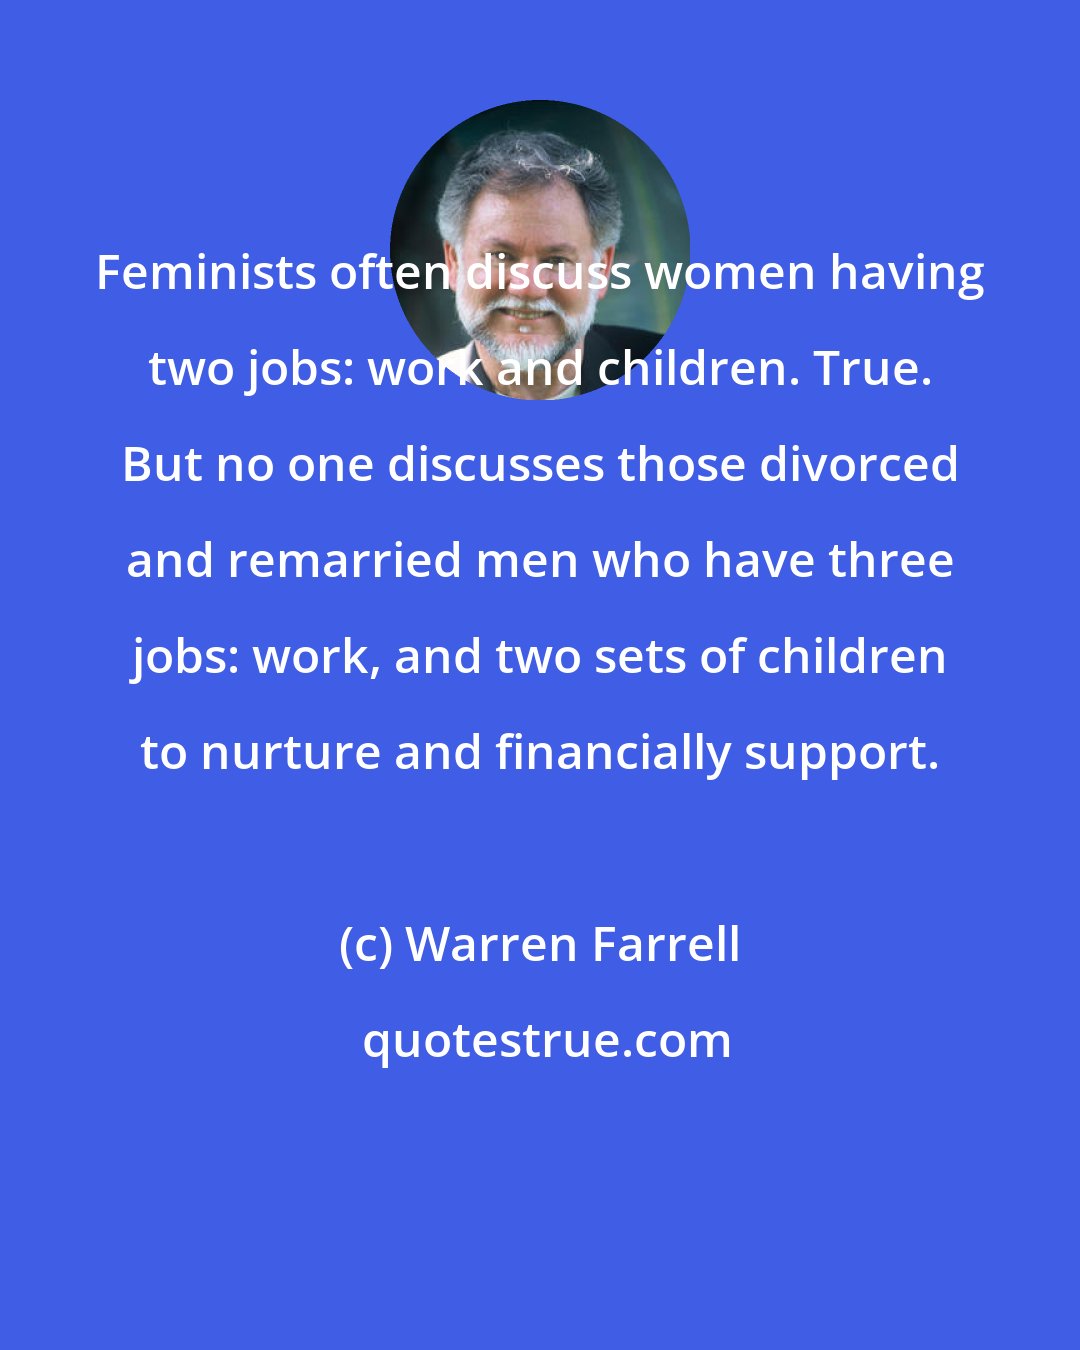 Warren Farrell: Feminists often discuss women having two jobs: work and children. True. But no one discusses those divorced and remarried men who have three jobs: work, and two sets of children to nurture and financially support.